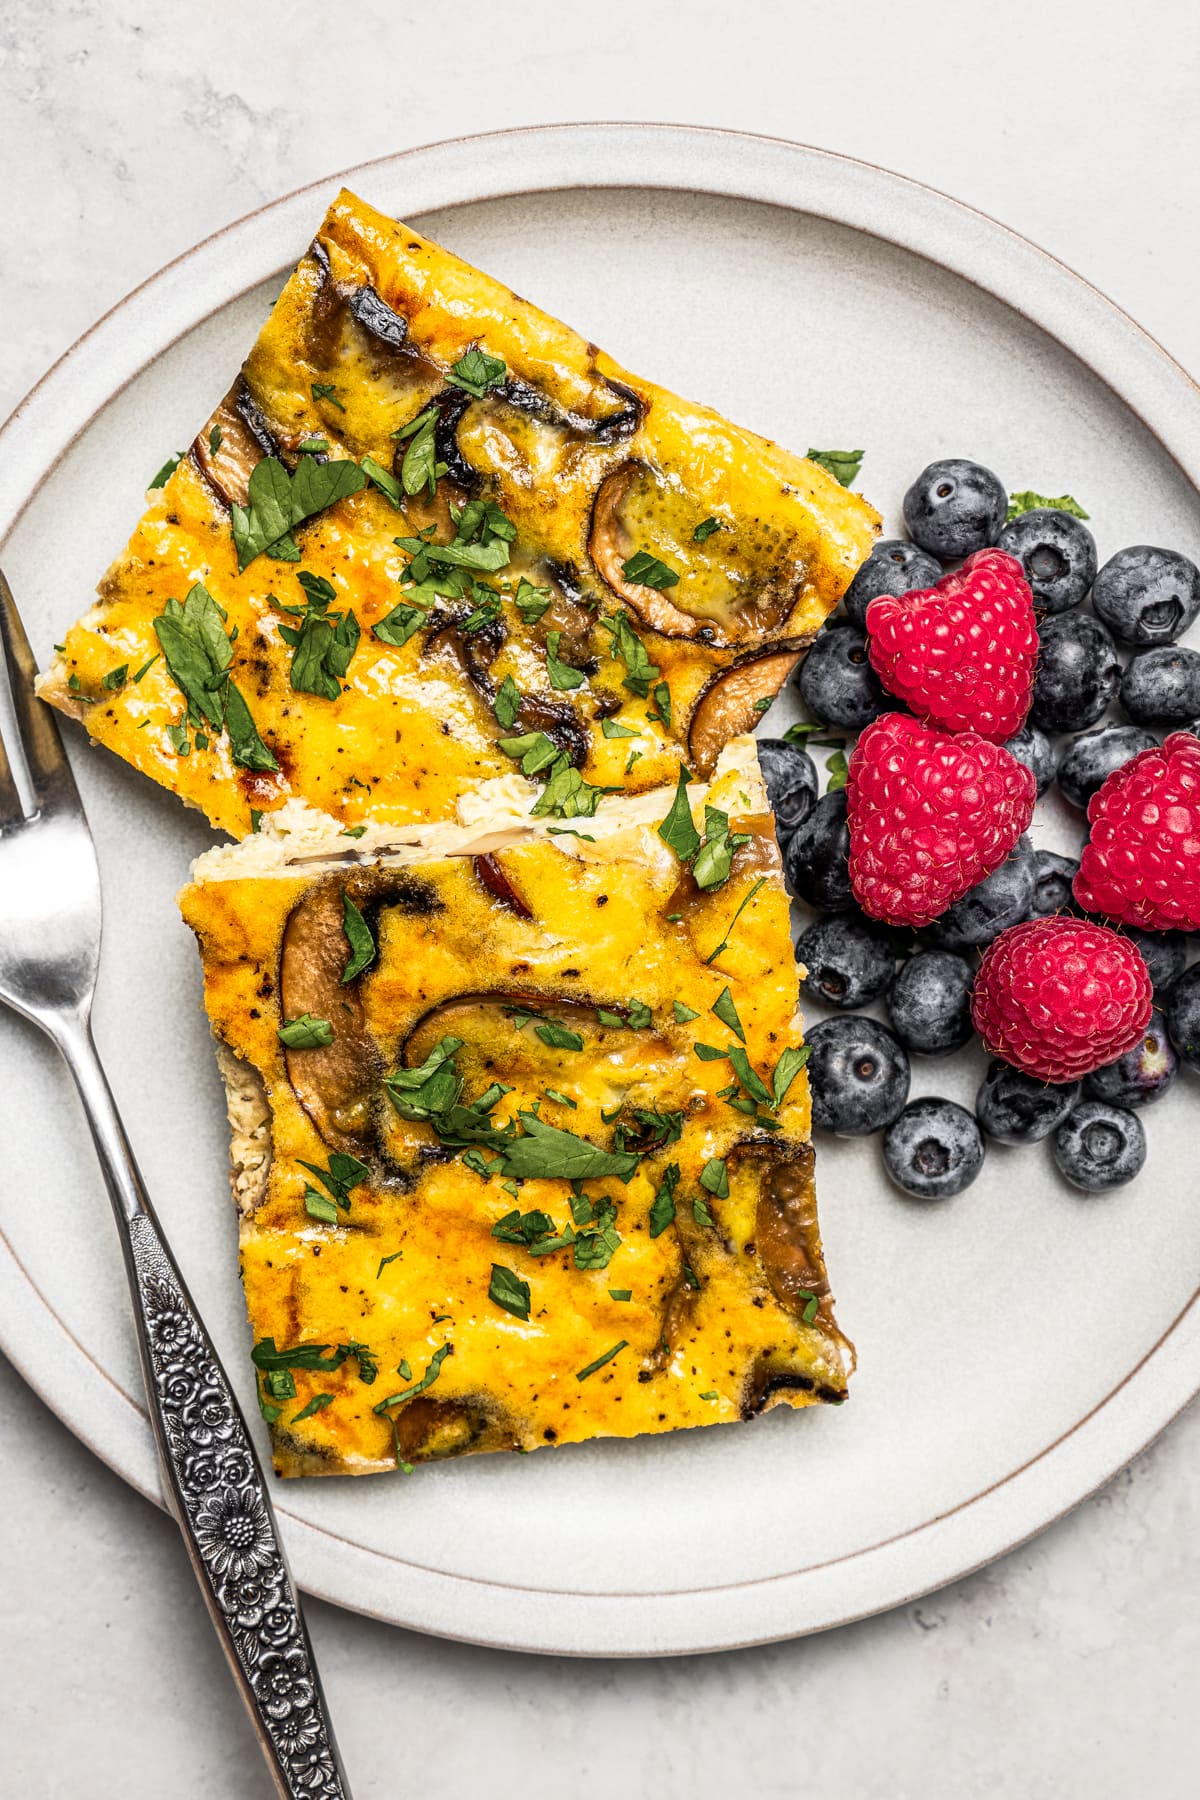 Slices of sheet pan eggs served on a plate with berries. Fresh berries are scattered around and another plate of sheet pan eggs is nearby.